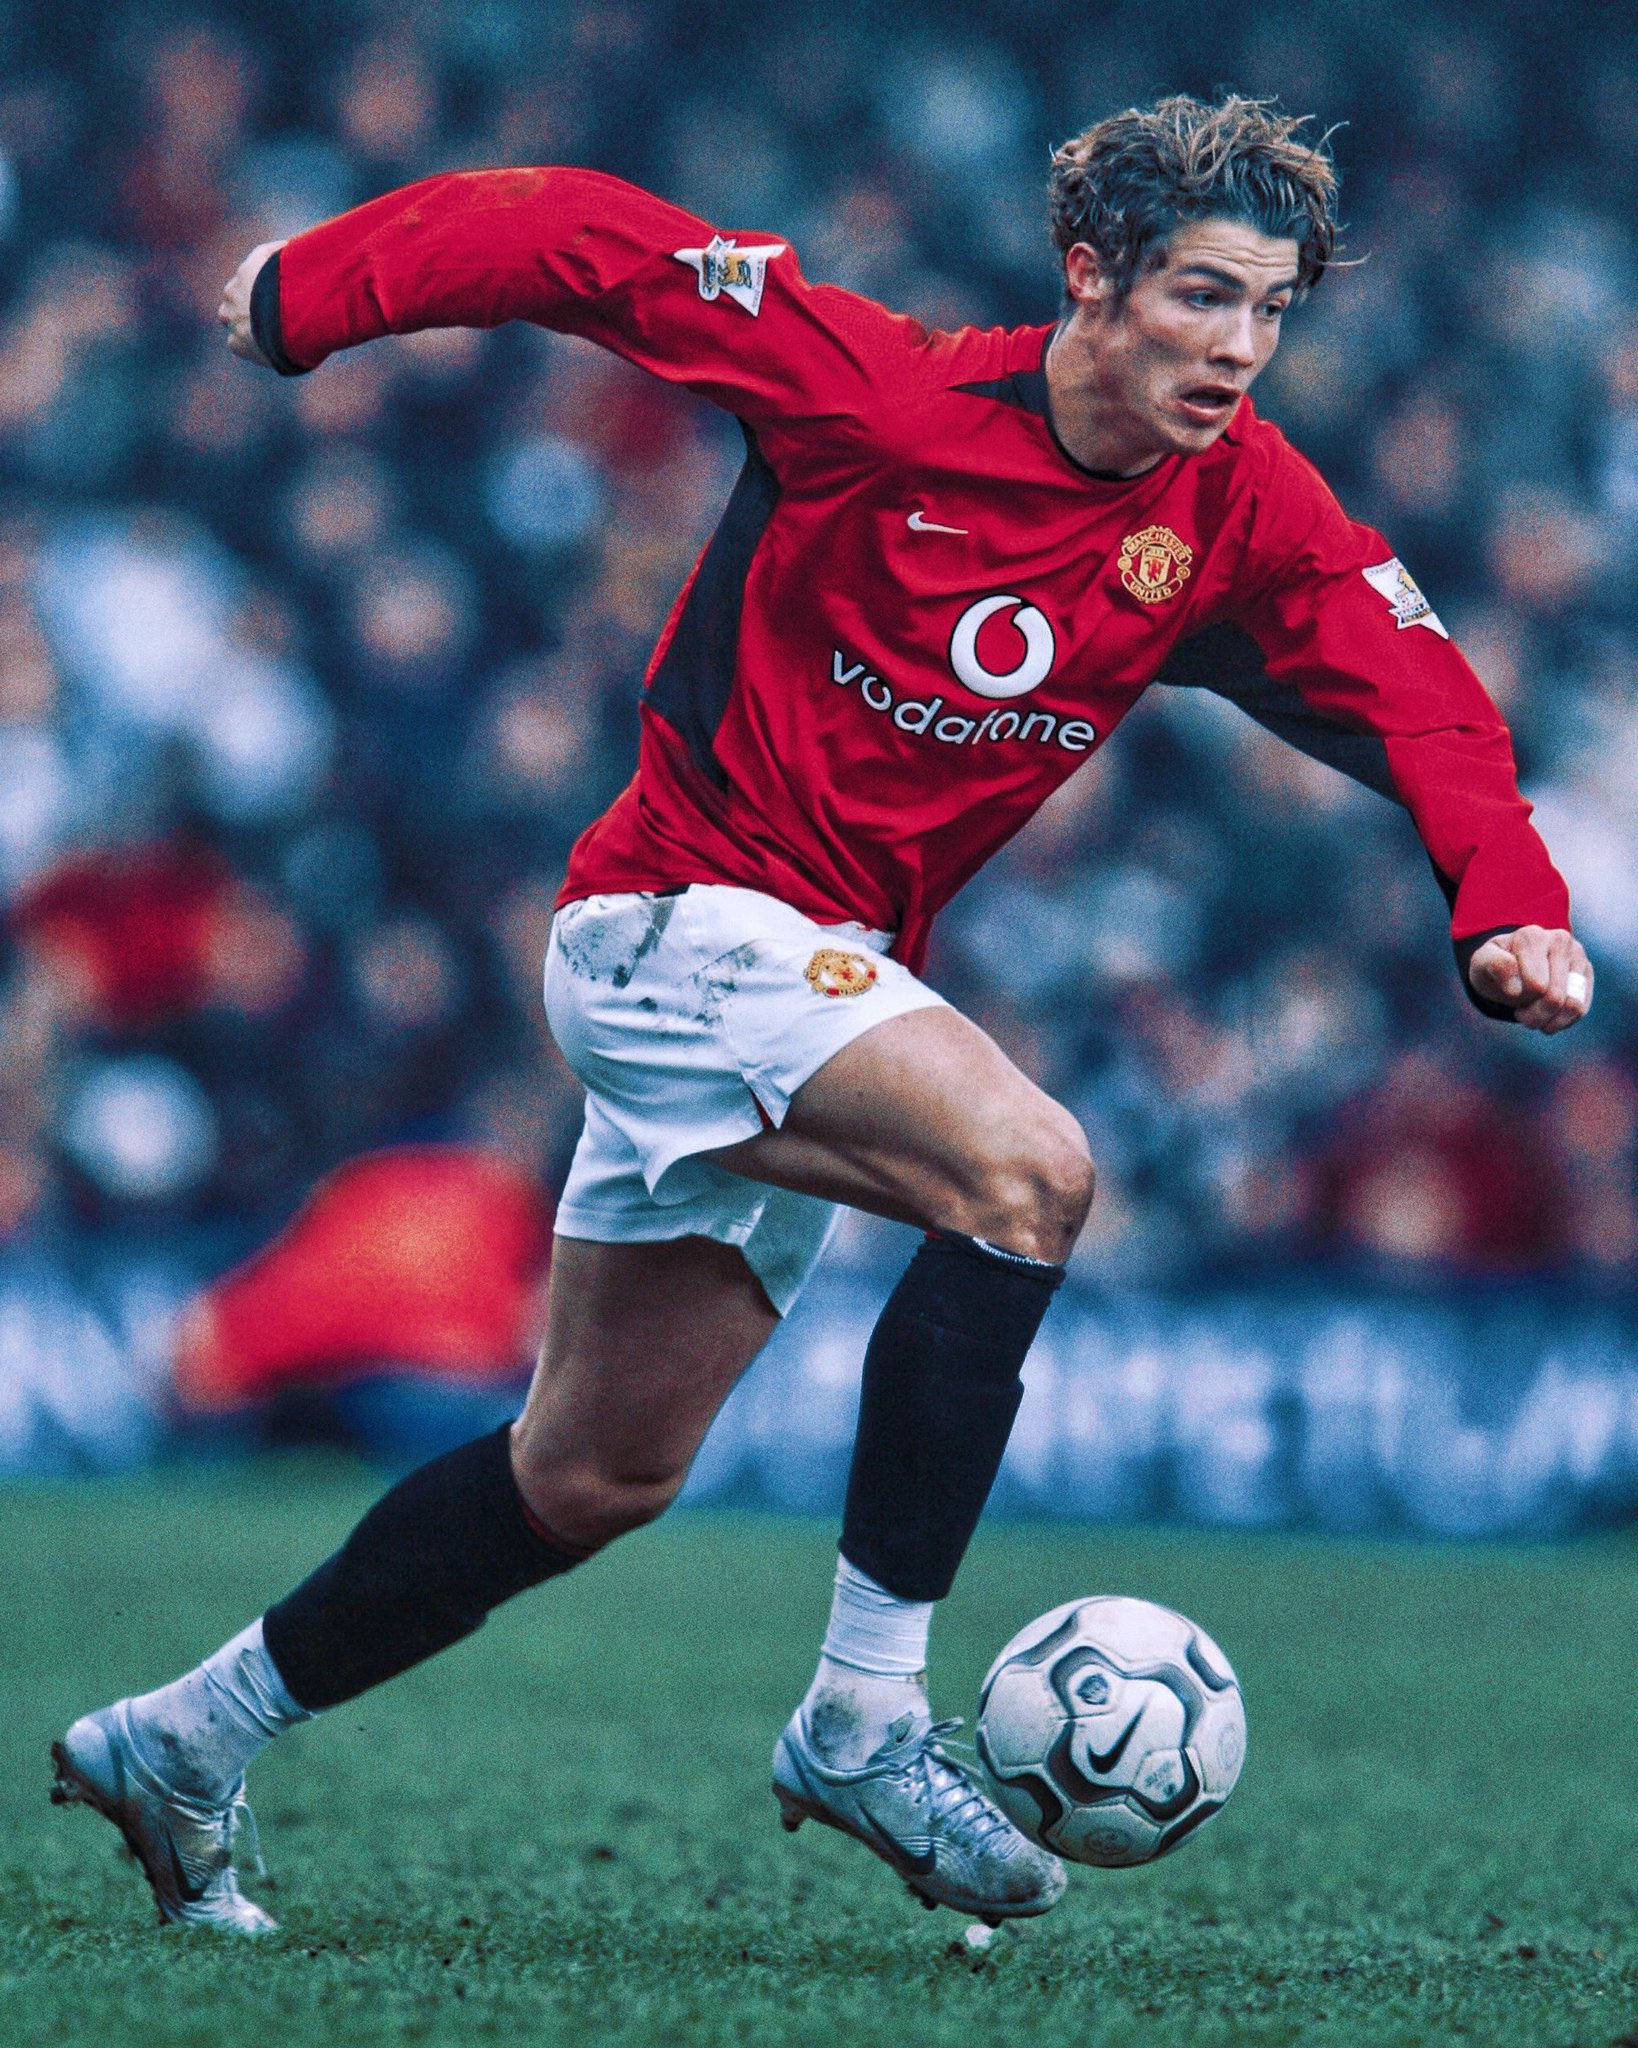 Cristiano Ronaldo Returns to Manchester United after 12 Years. Best Photo of CR7